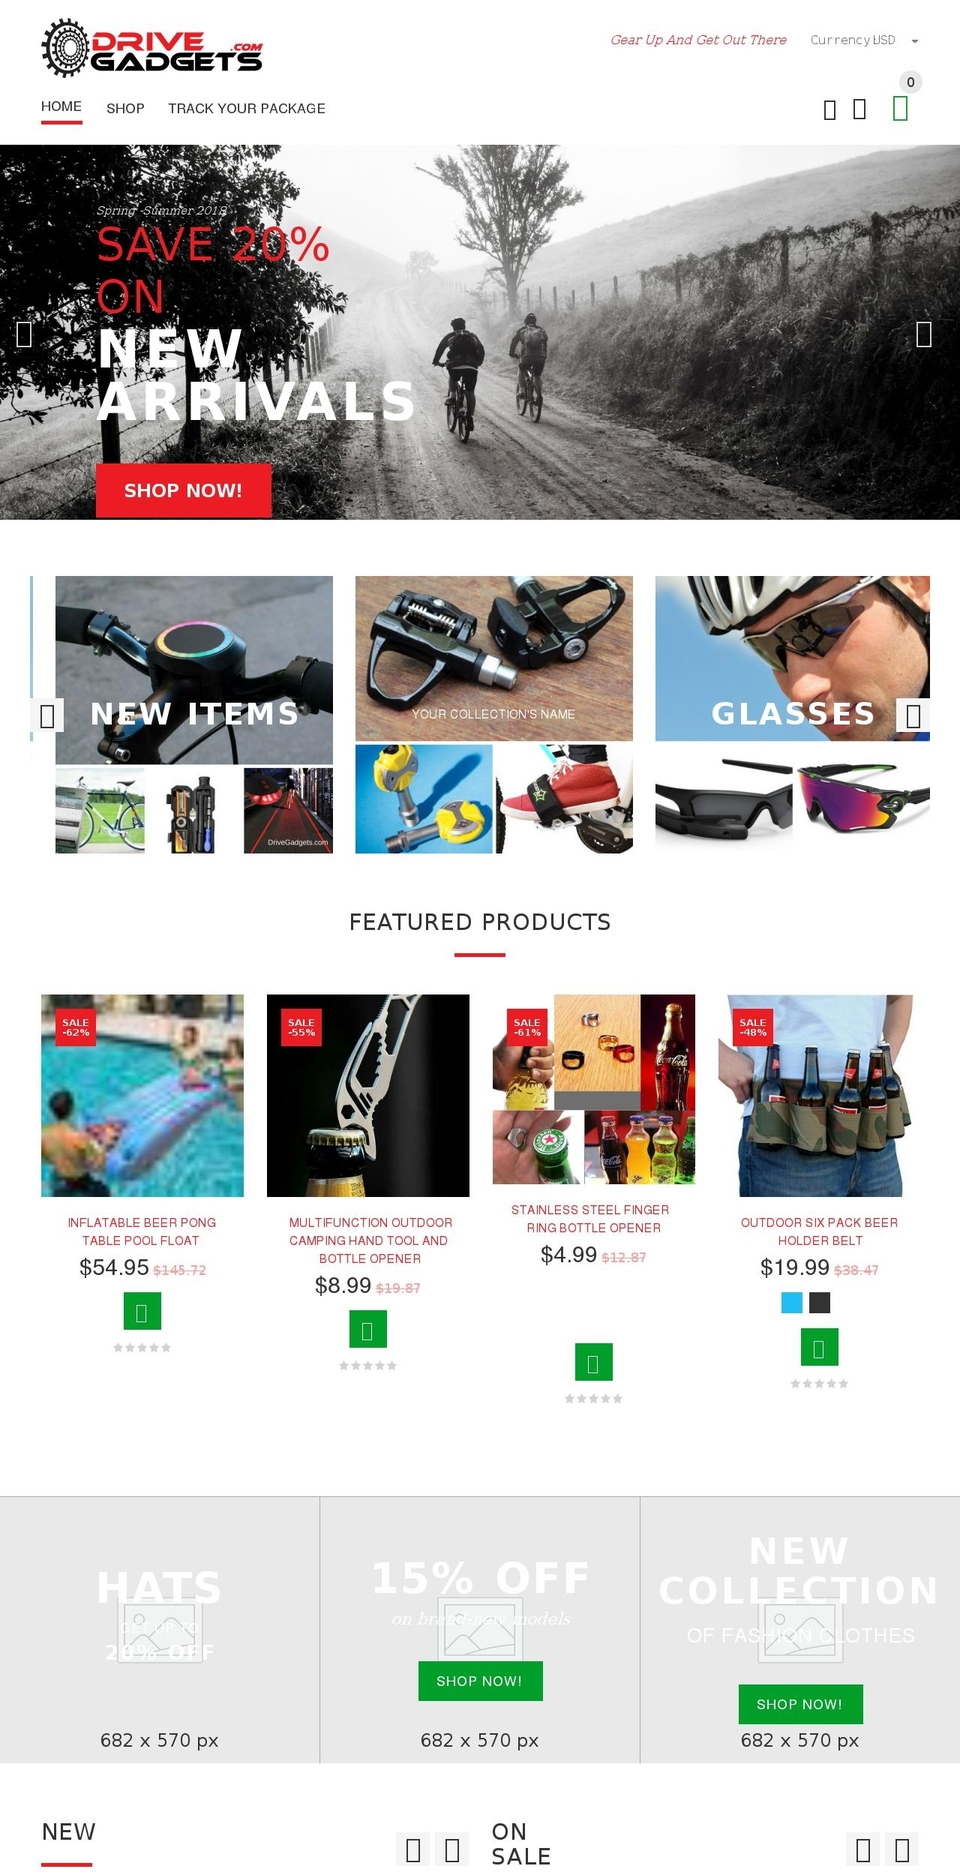 install-me-yourstore-v2-1-9 Shopify theme site example drivegadgets.com